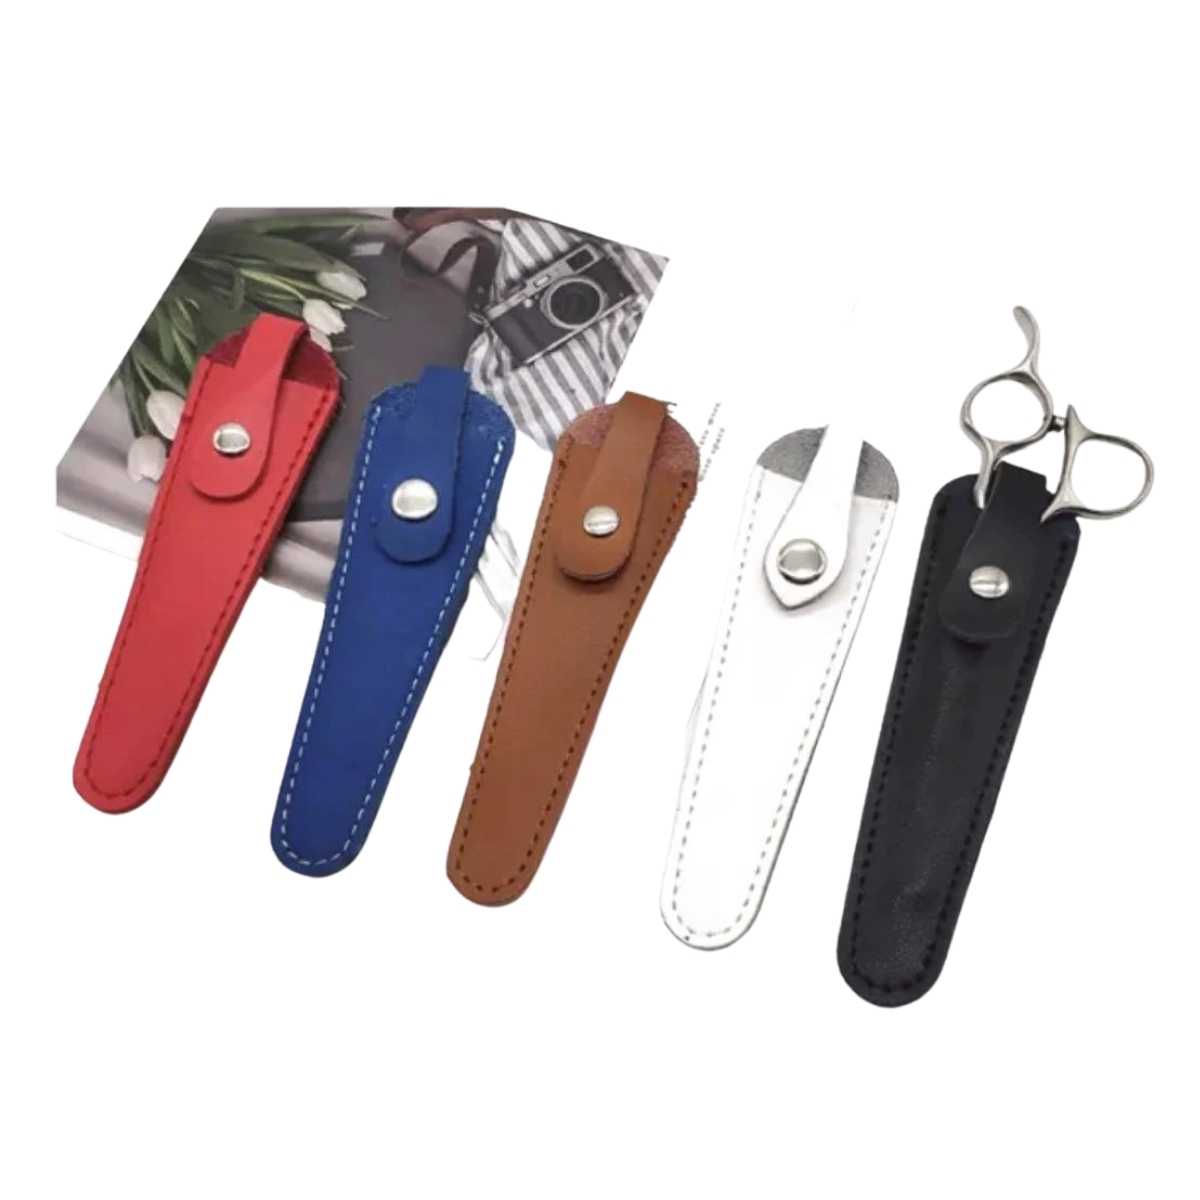  6 Pieces Scissors Sheath Safety Leather Scissors Cover